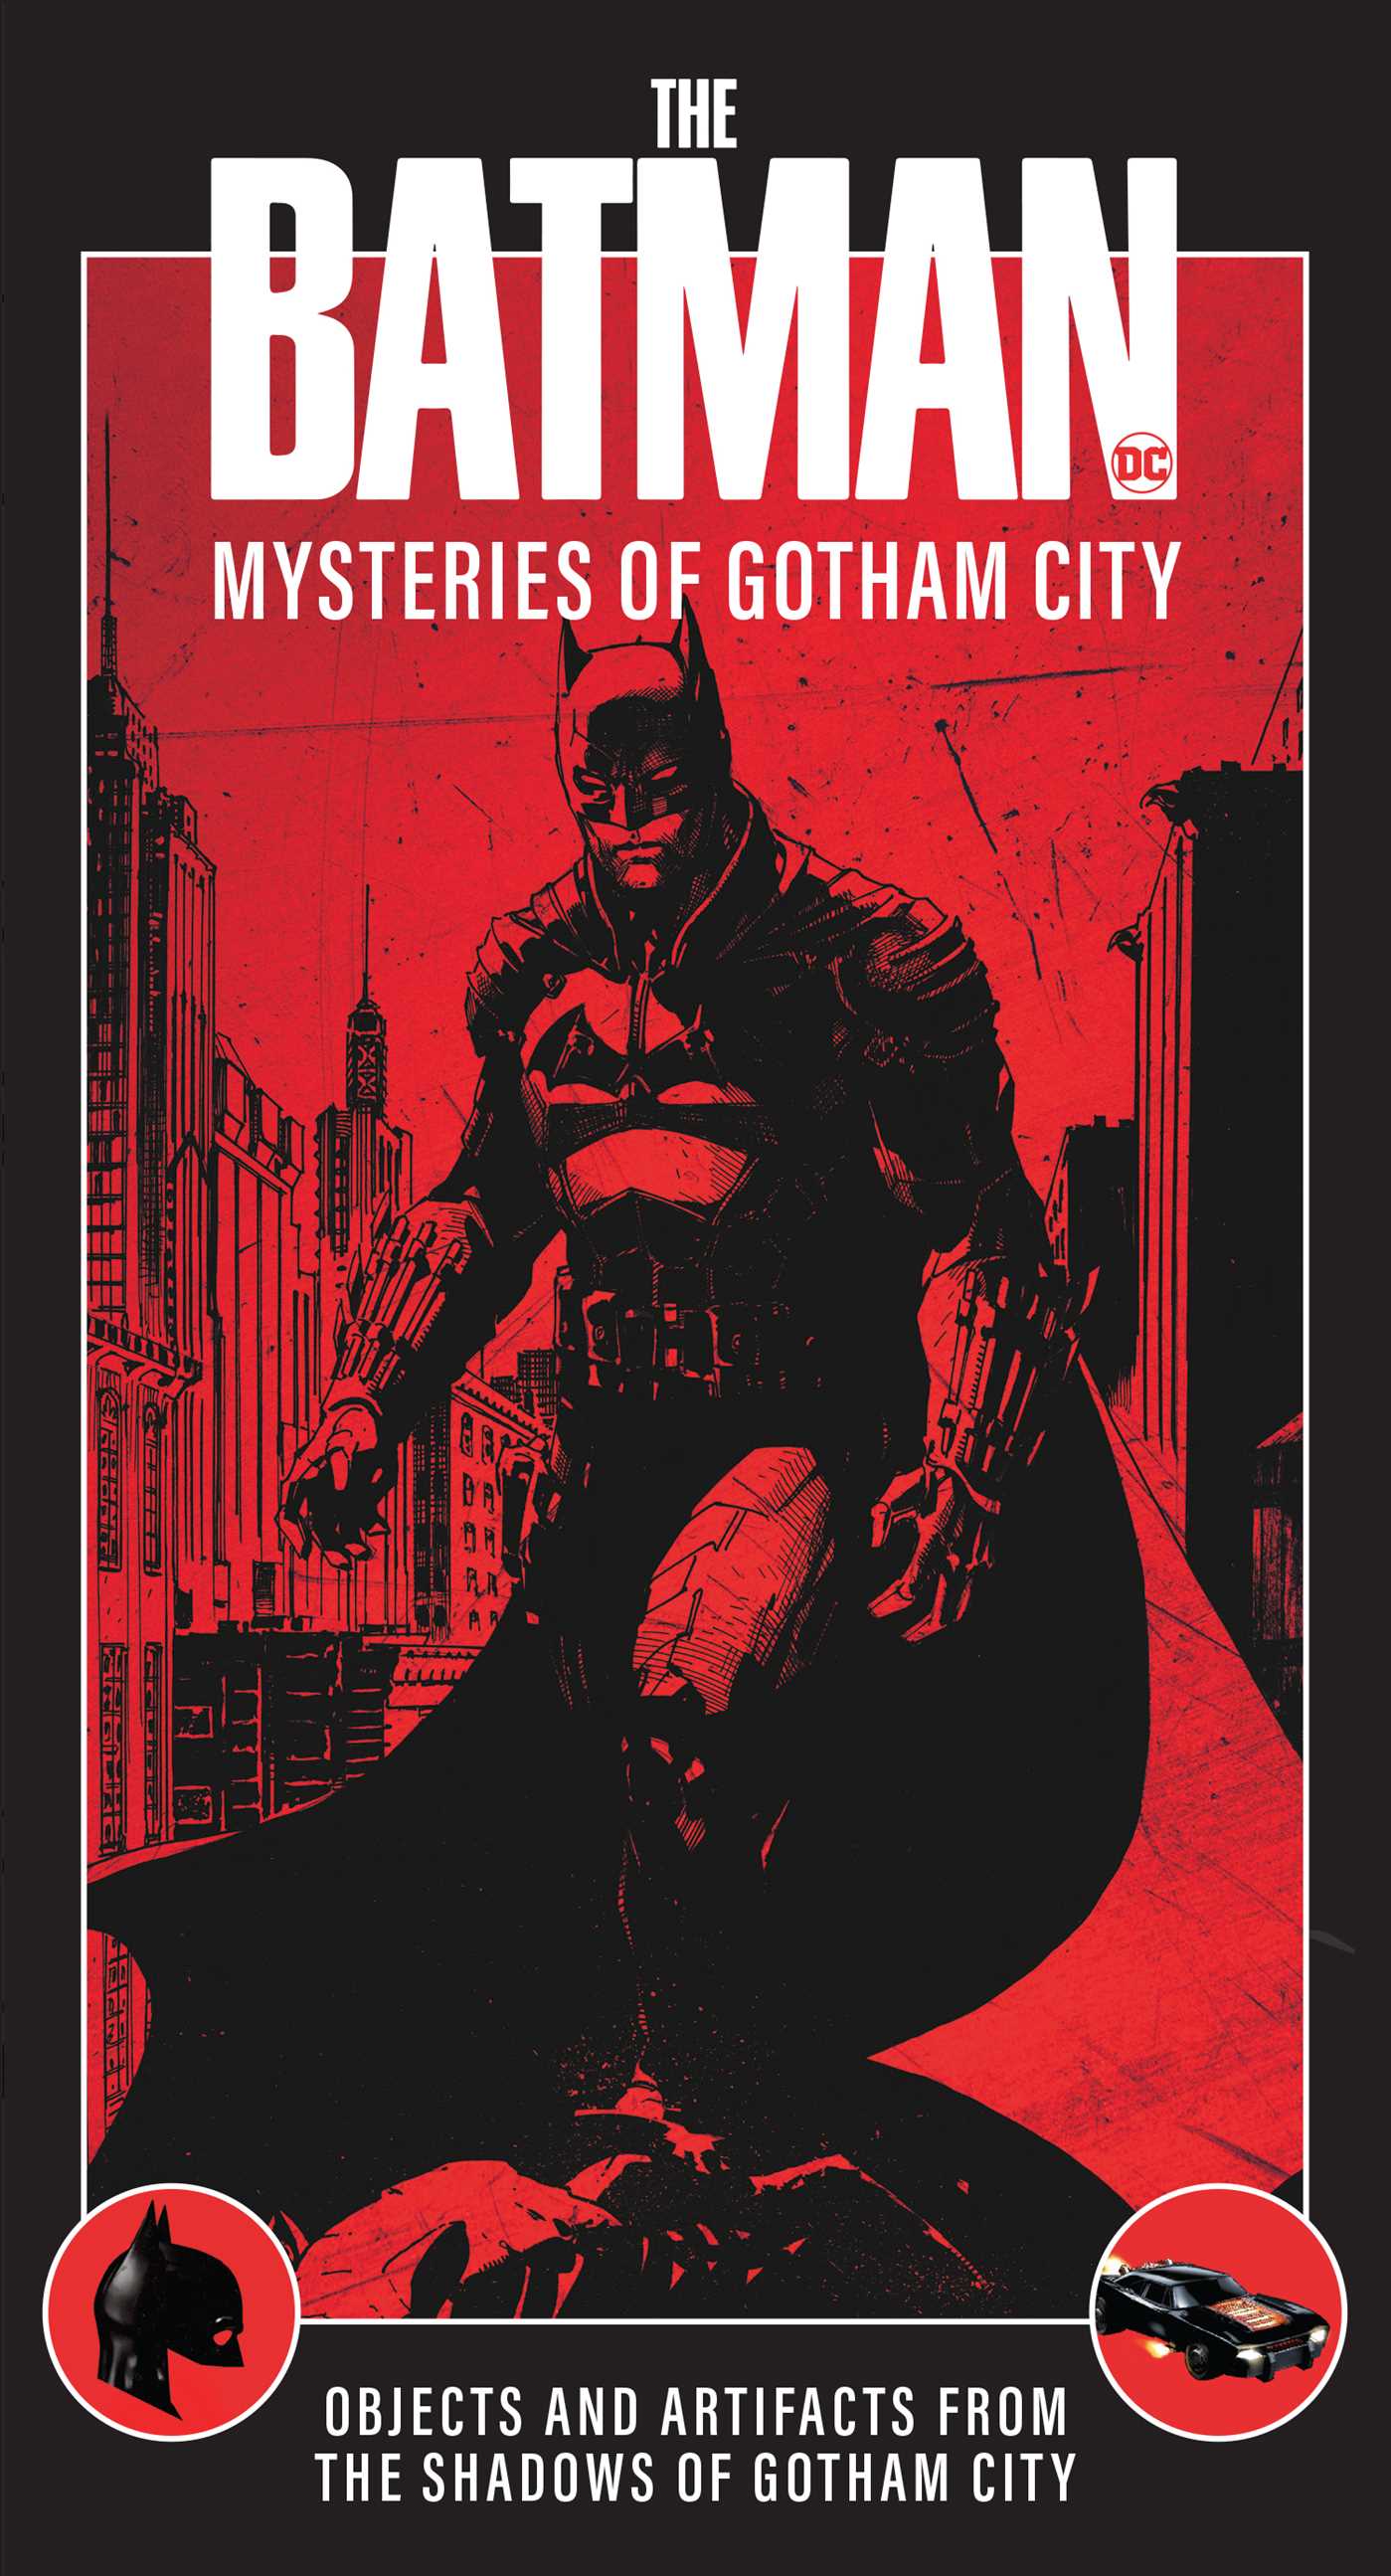 The Batman: Mysteries of Gotham City Summary & Video. Official Publisher Page. Simon & Schuster